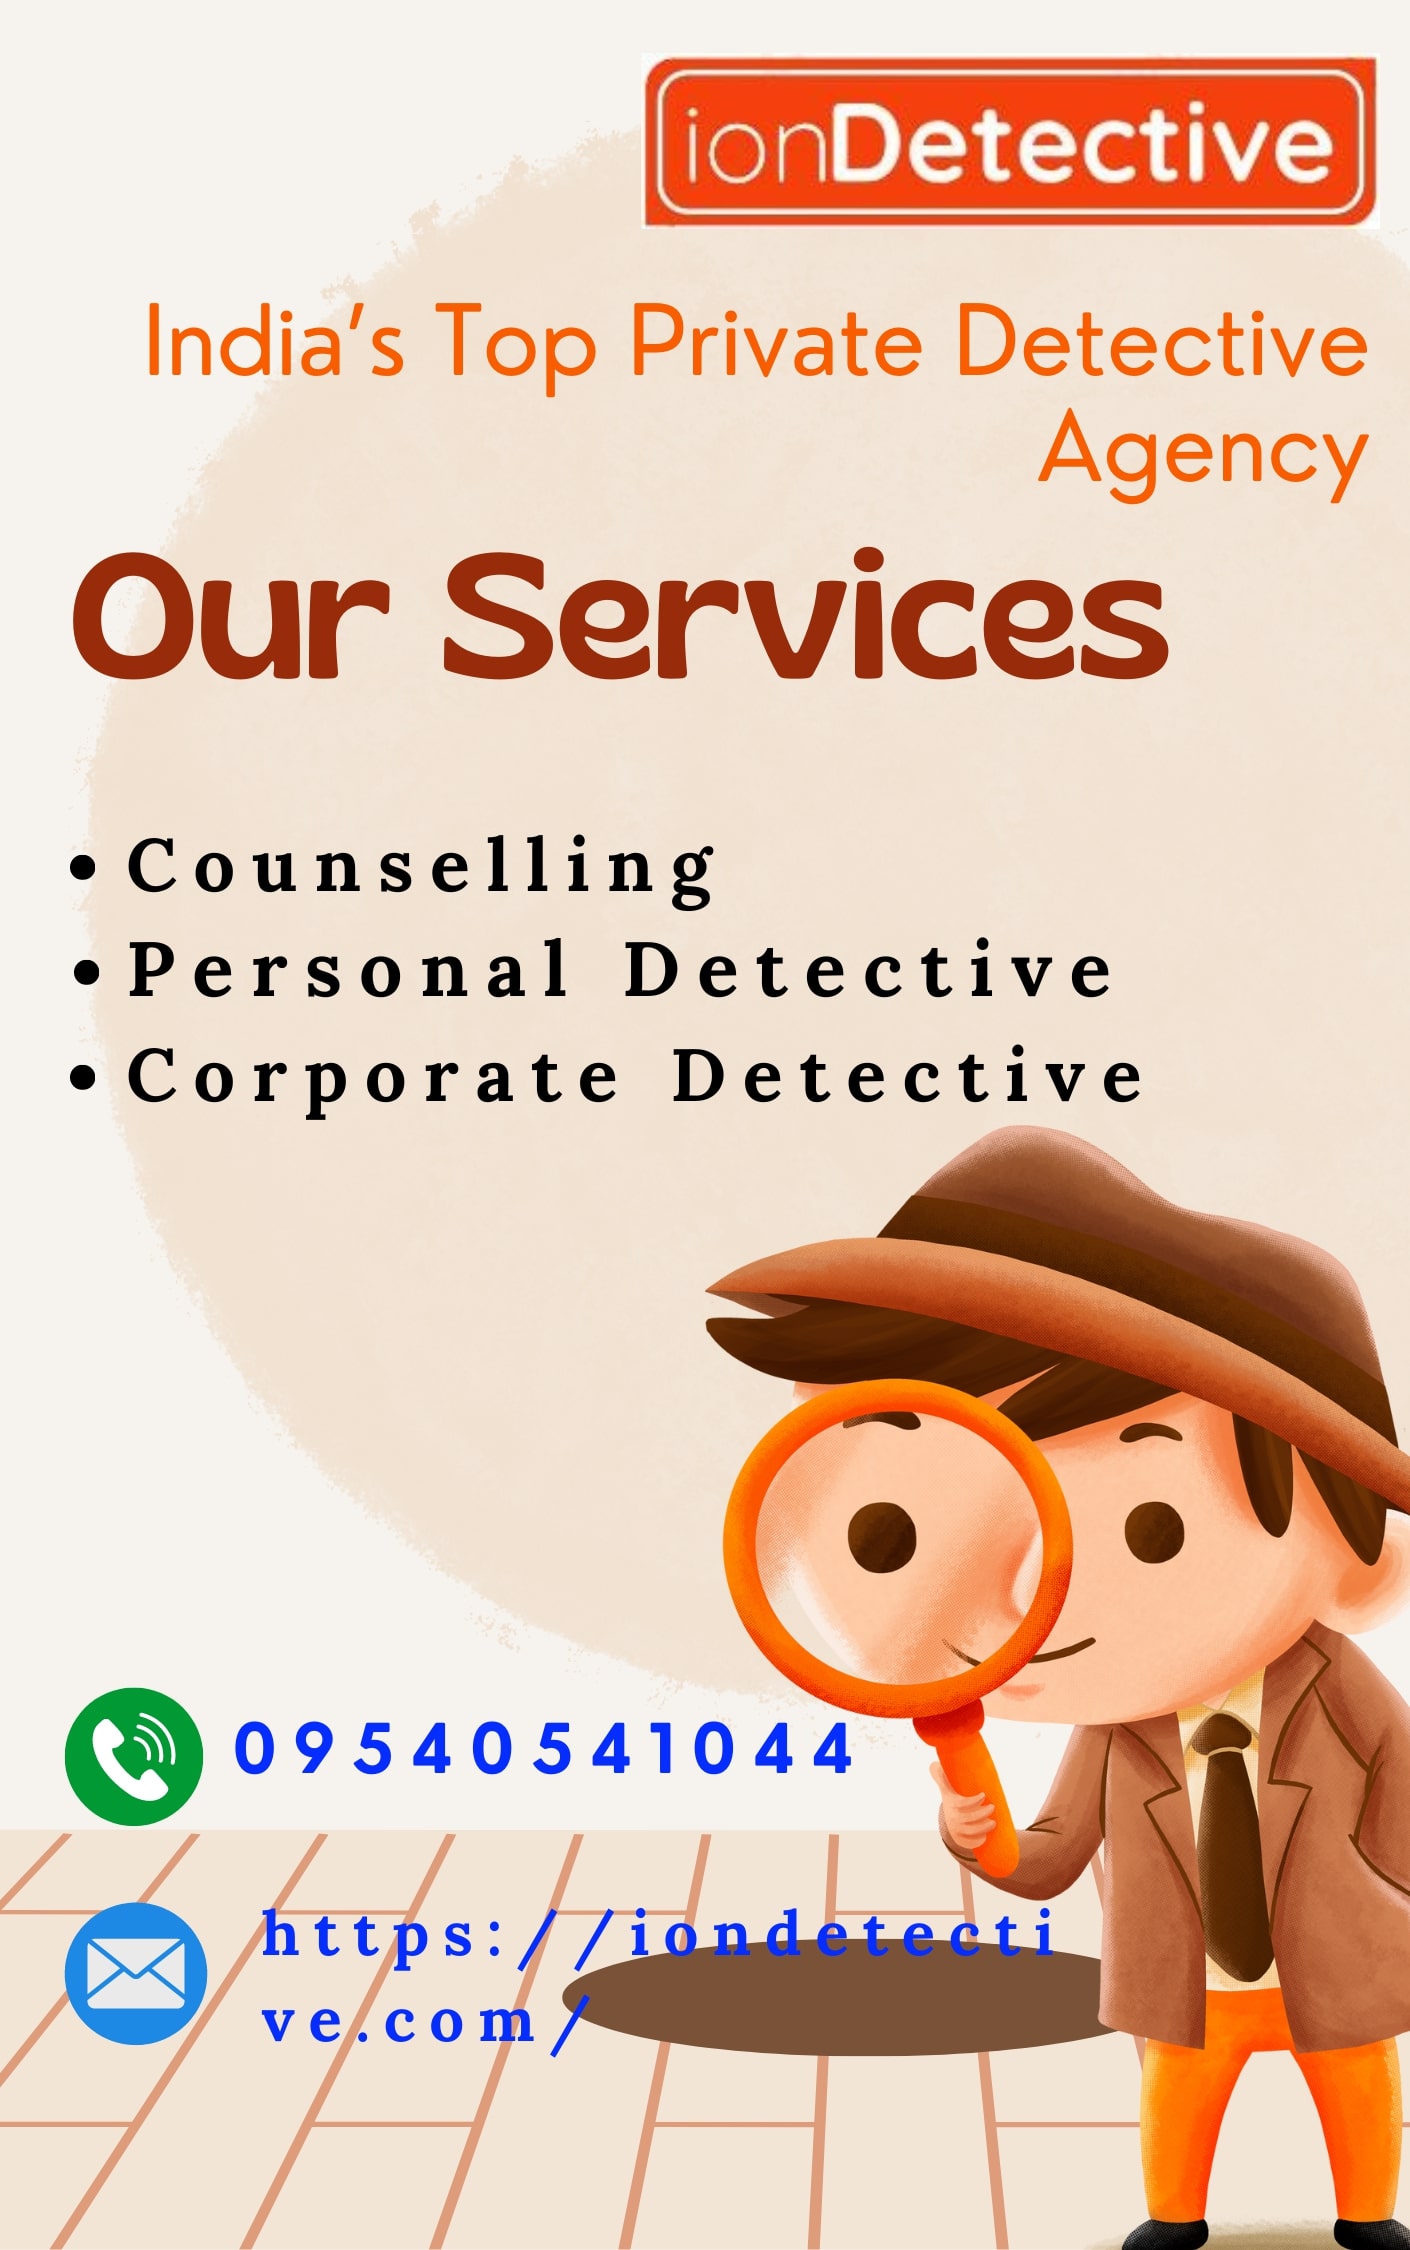 Detective Agency in Bangalore